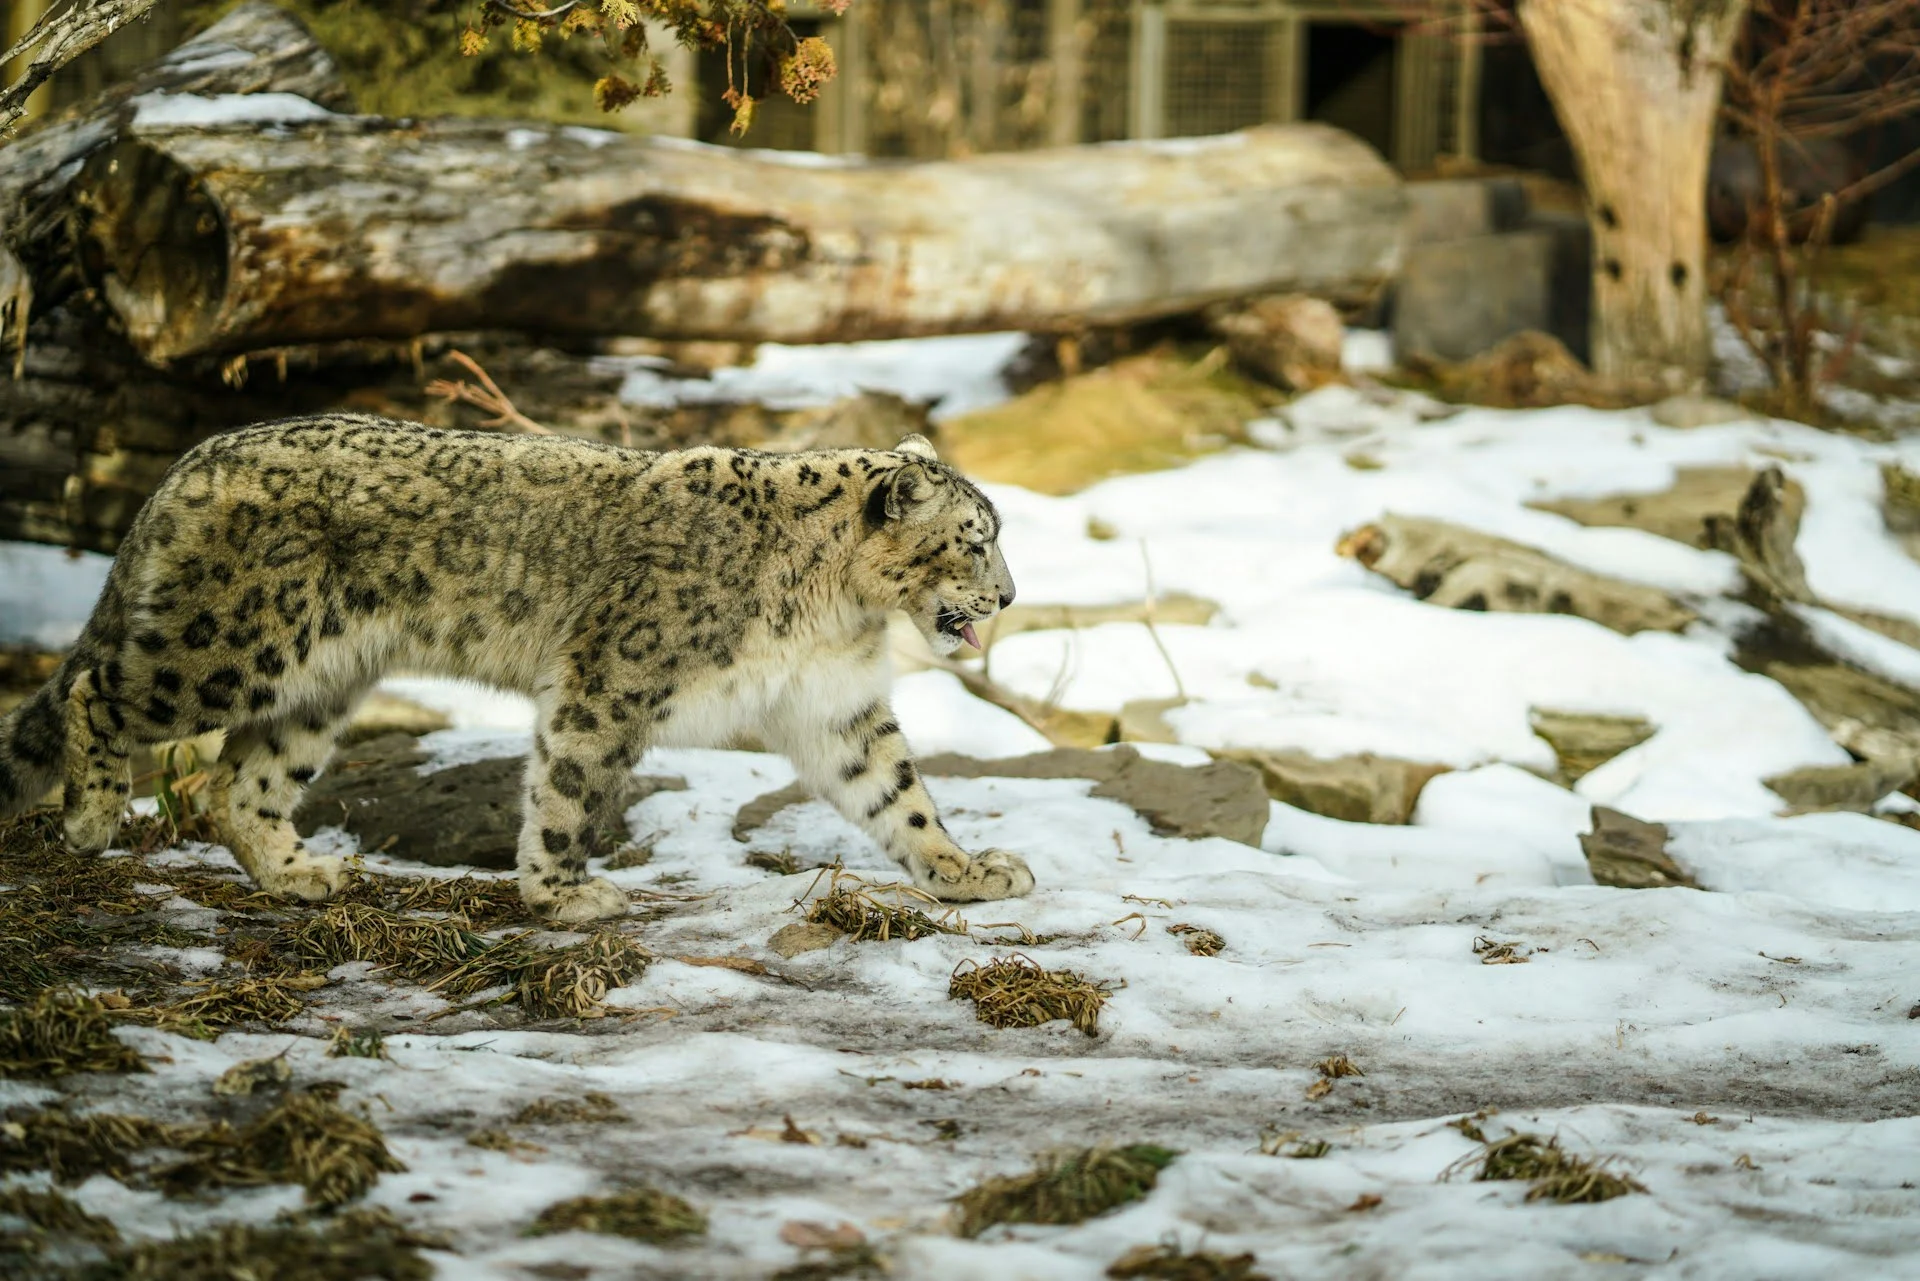 Snow Leopard expedition in india